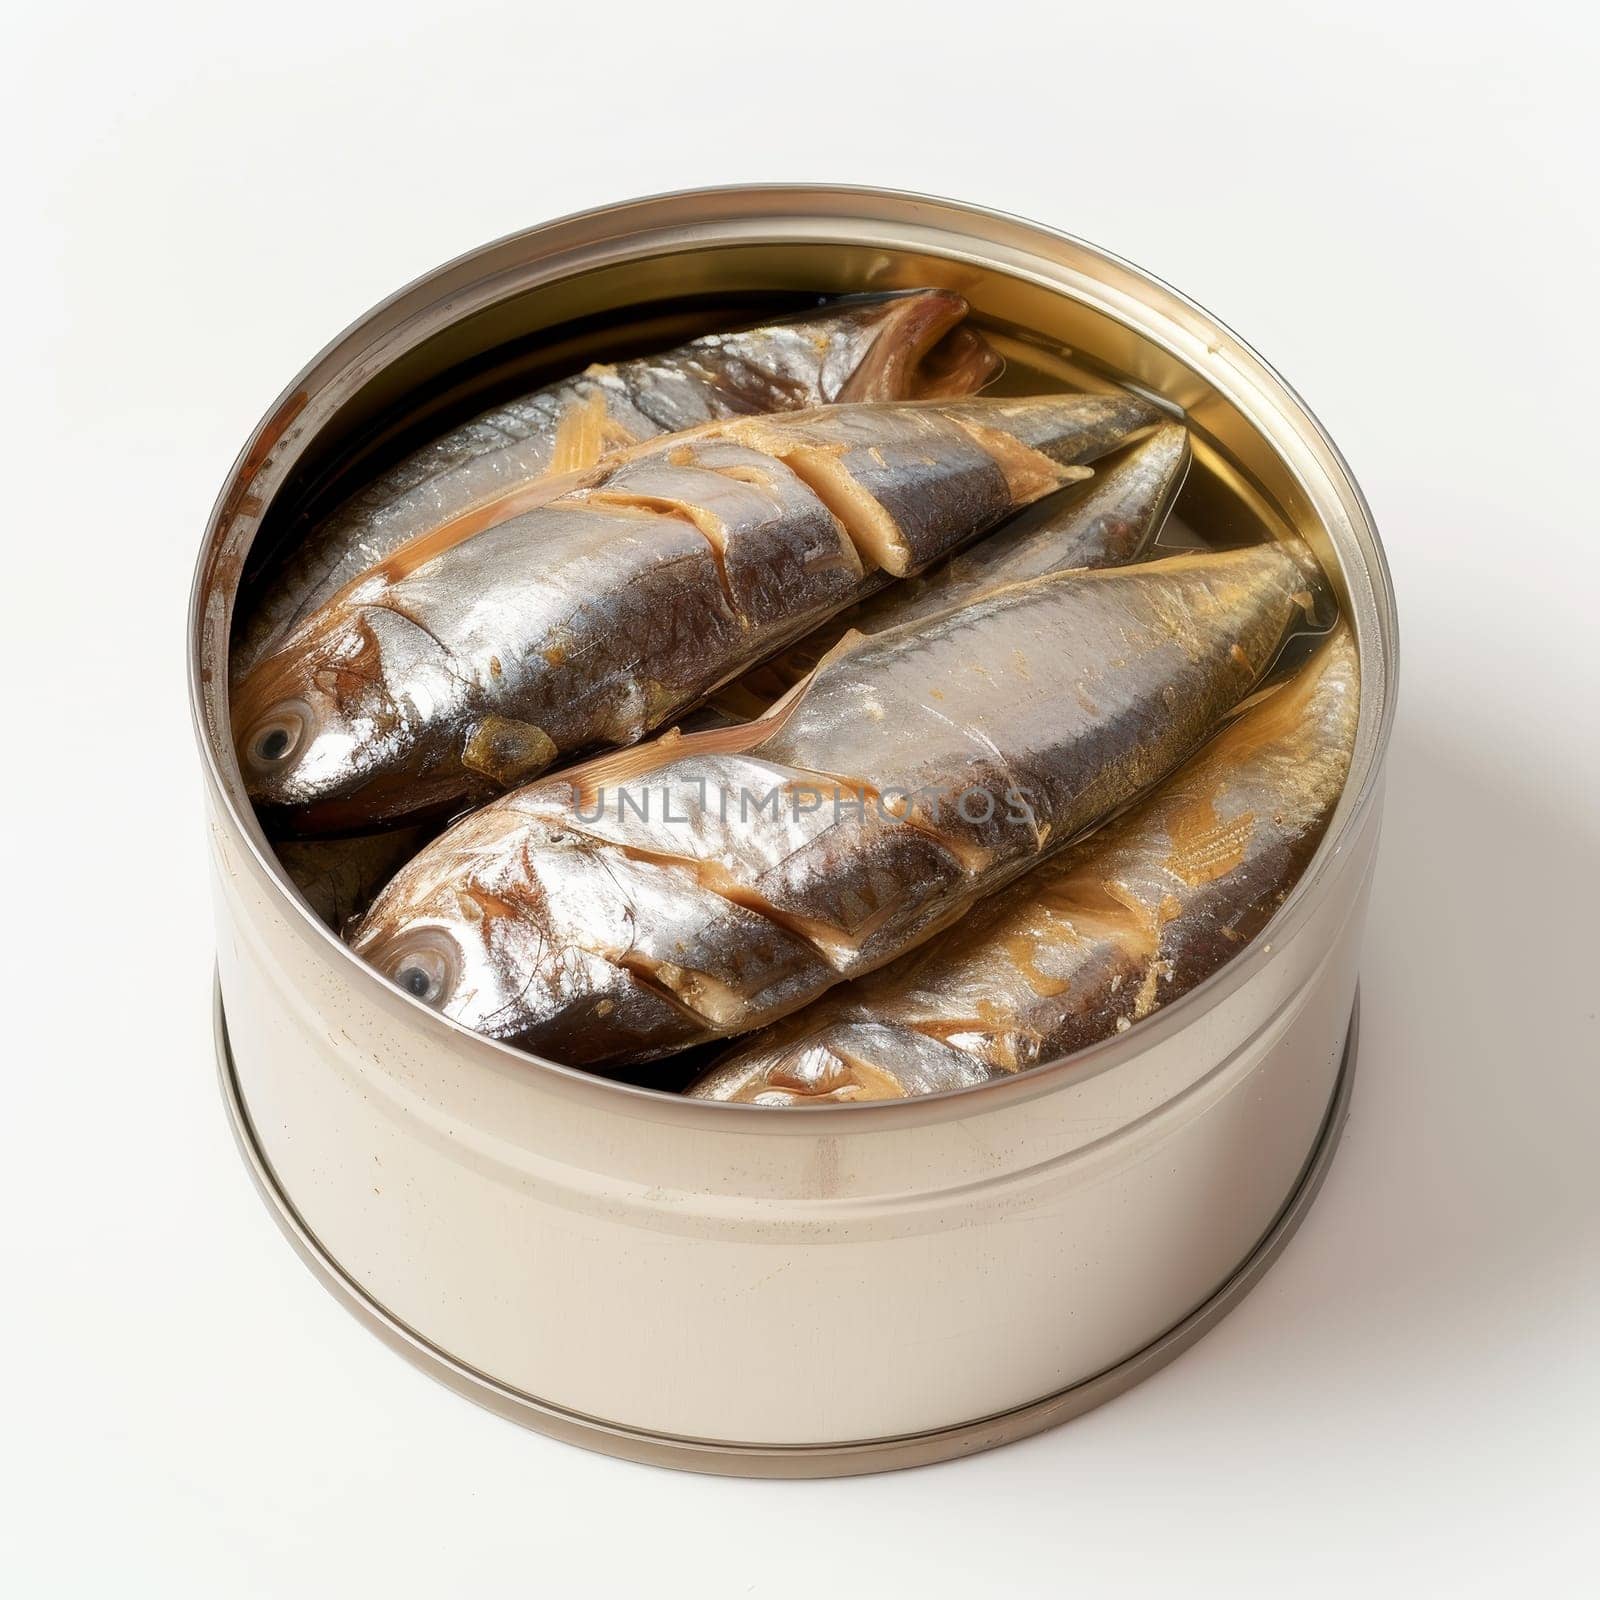 Open can revealing whole mackerel fish in oil, isolated on a white background.